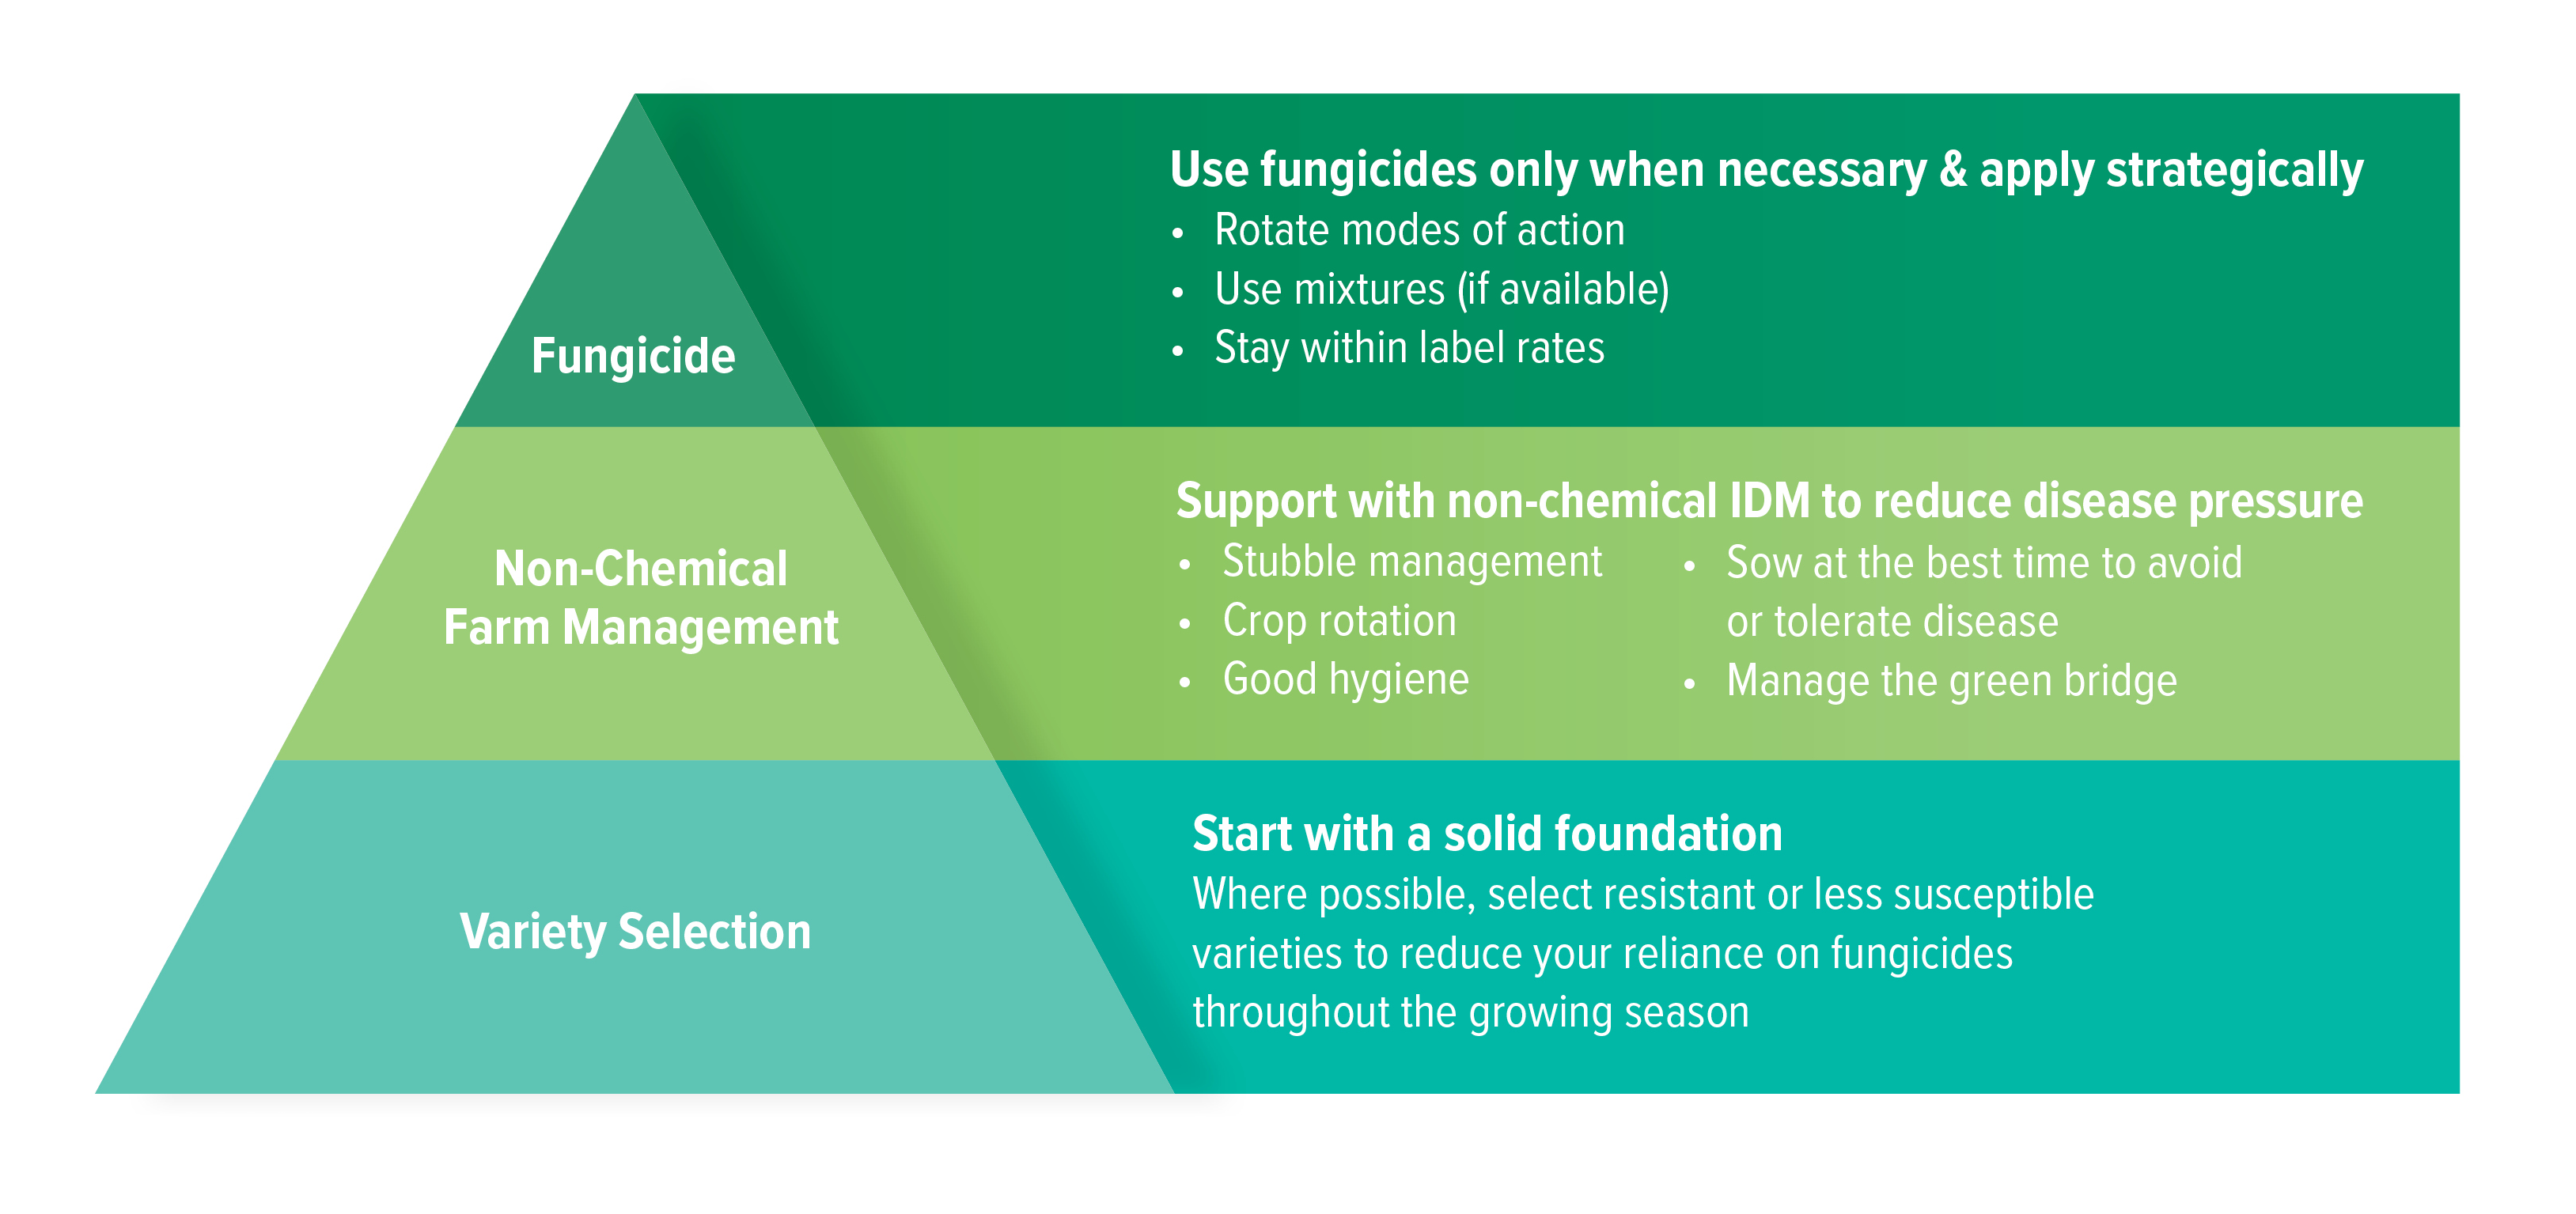 Growers should seek to provide a strong and reliable foundation of resistant or less-susceptible crop varieties, supported by non-chemical integrated disease management that can be complemented by strategic and responsible use of fungicides.